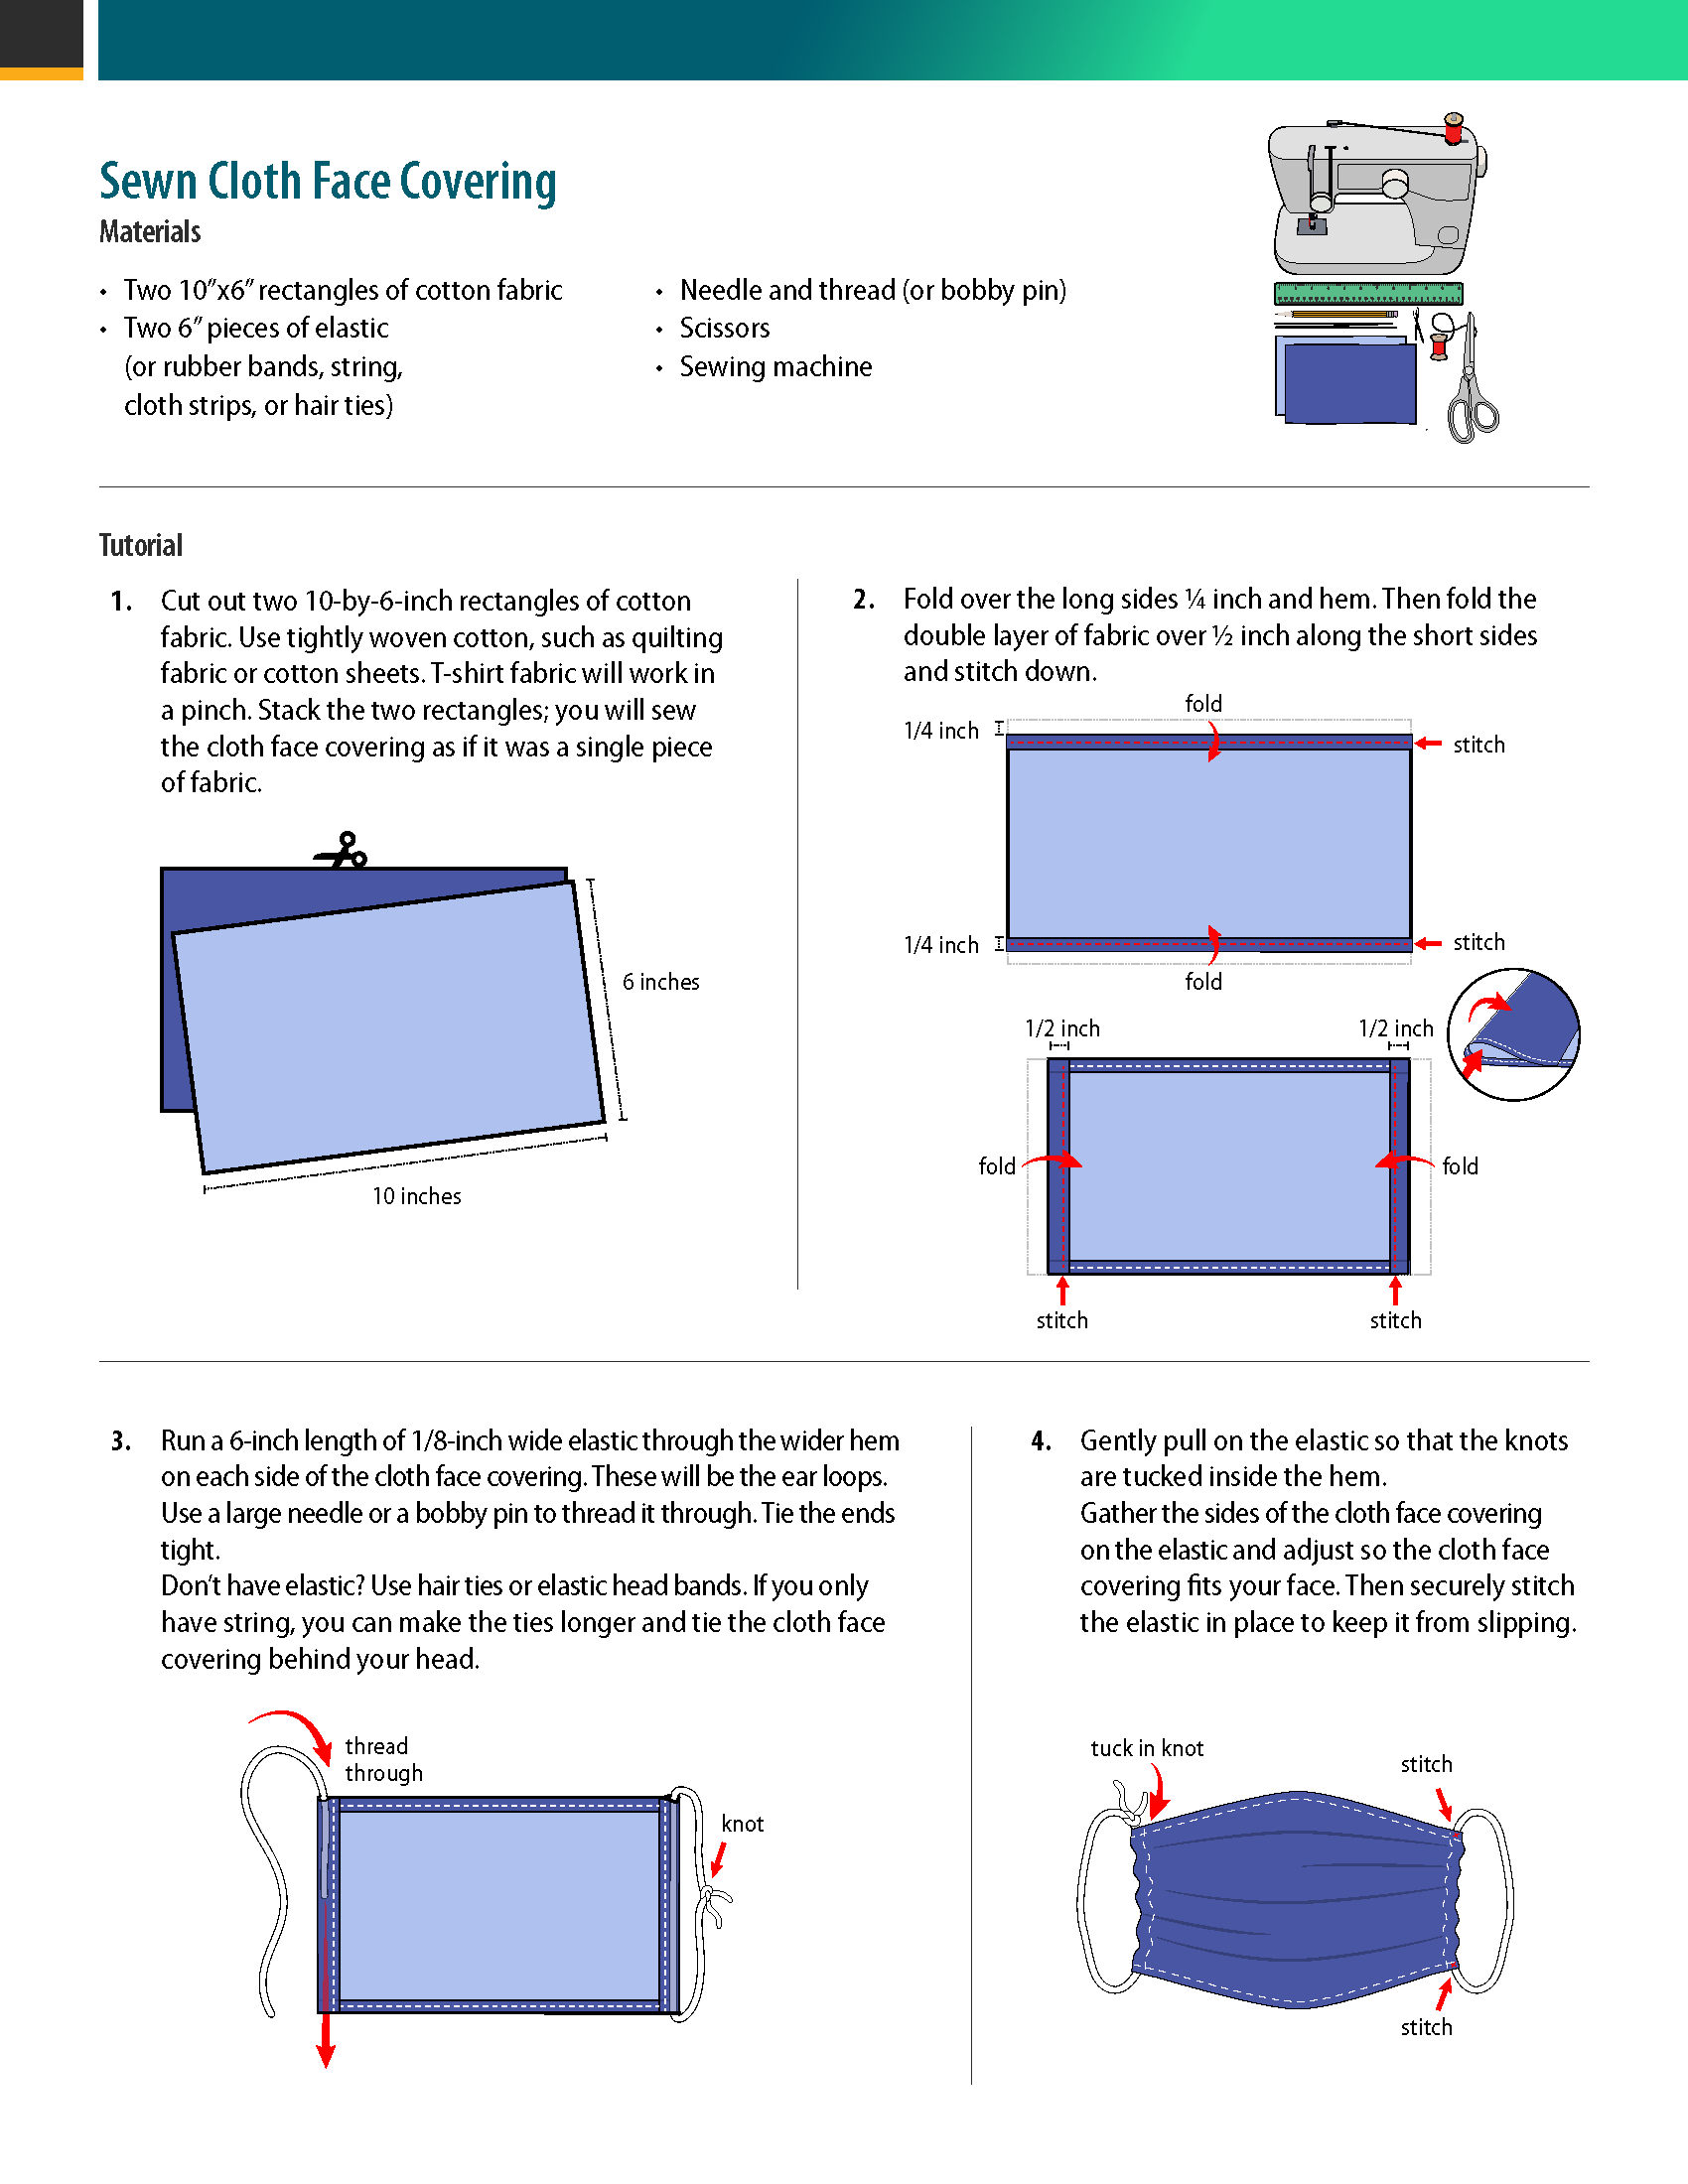 Cloth Face Covering Instructions and Guidance From CDC